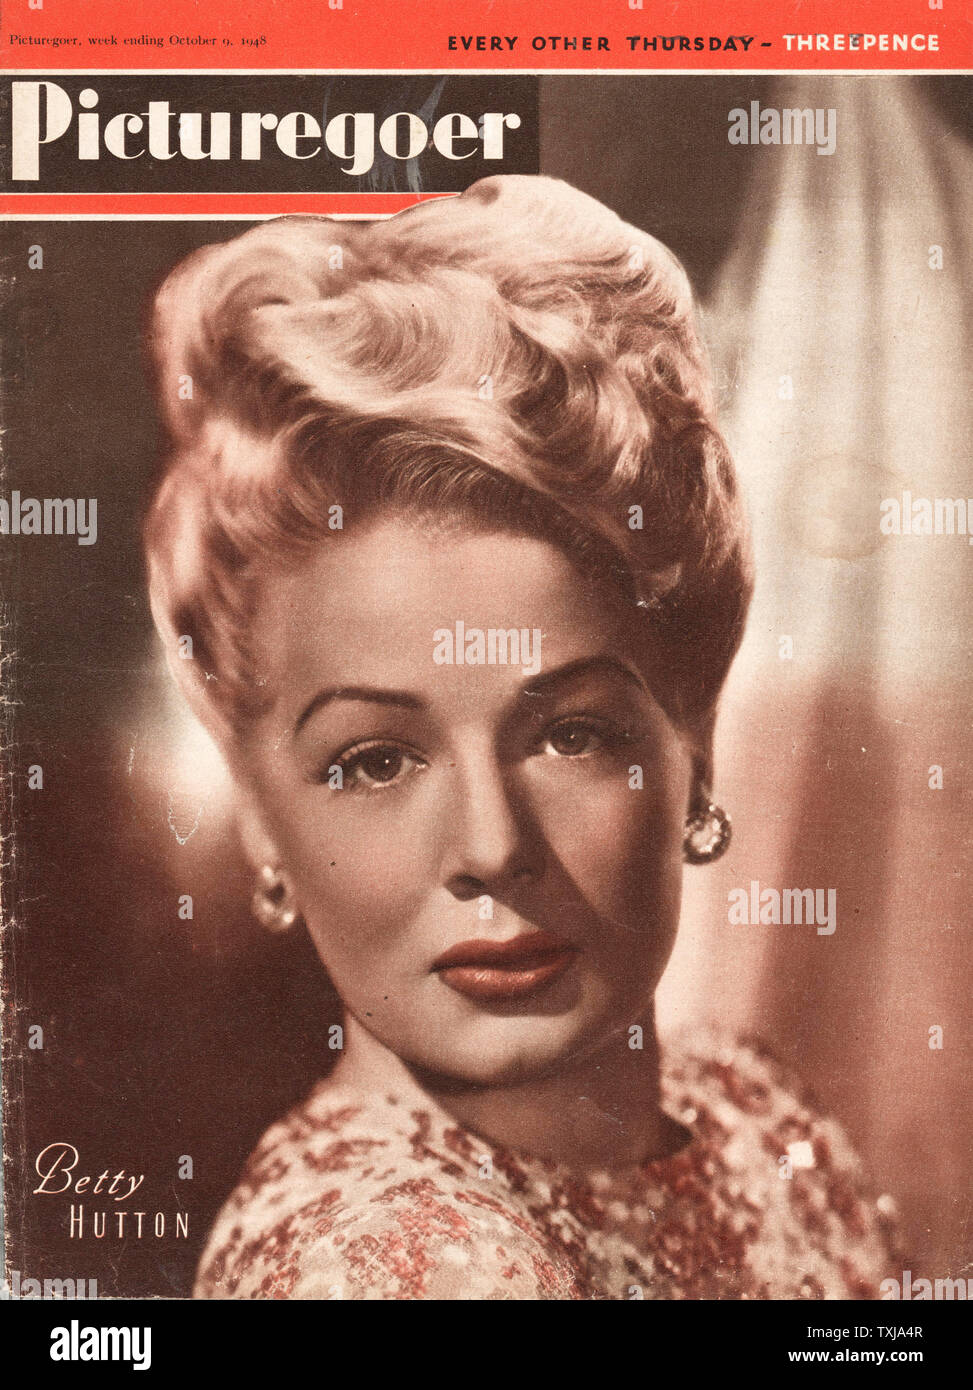 1948 Picturegoer magazine front page actress Betty Hutton Stock Photo